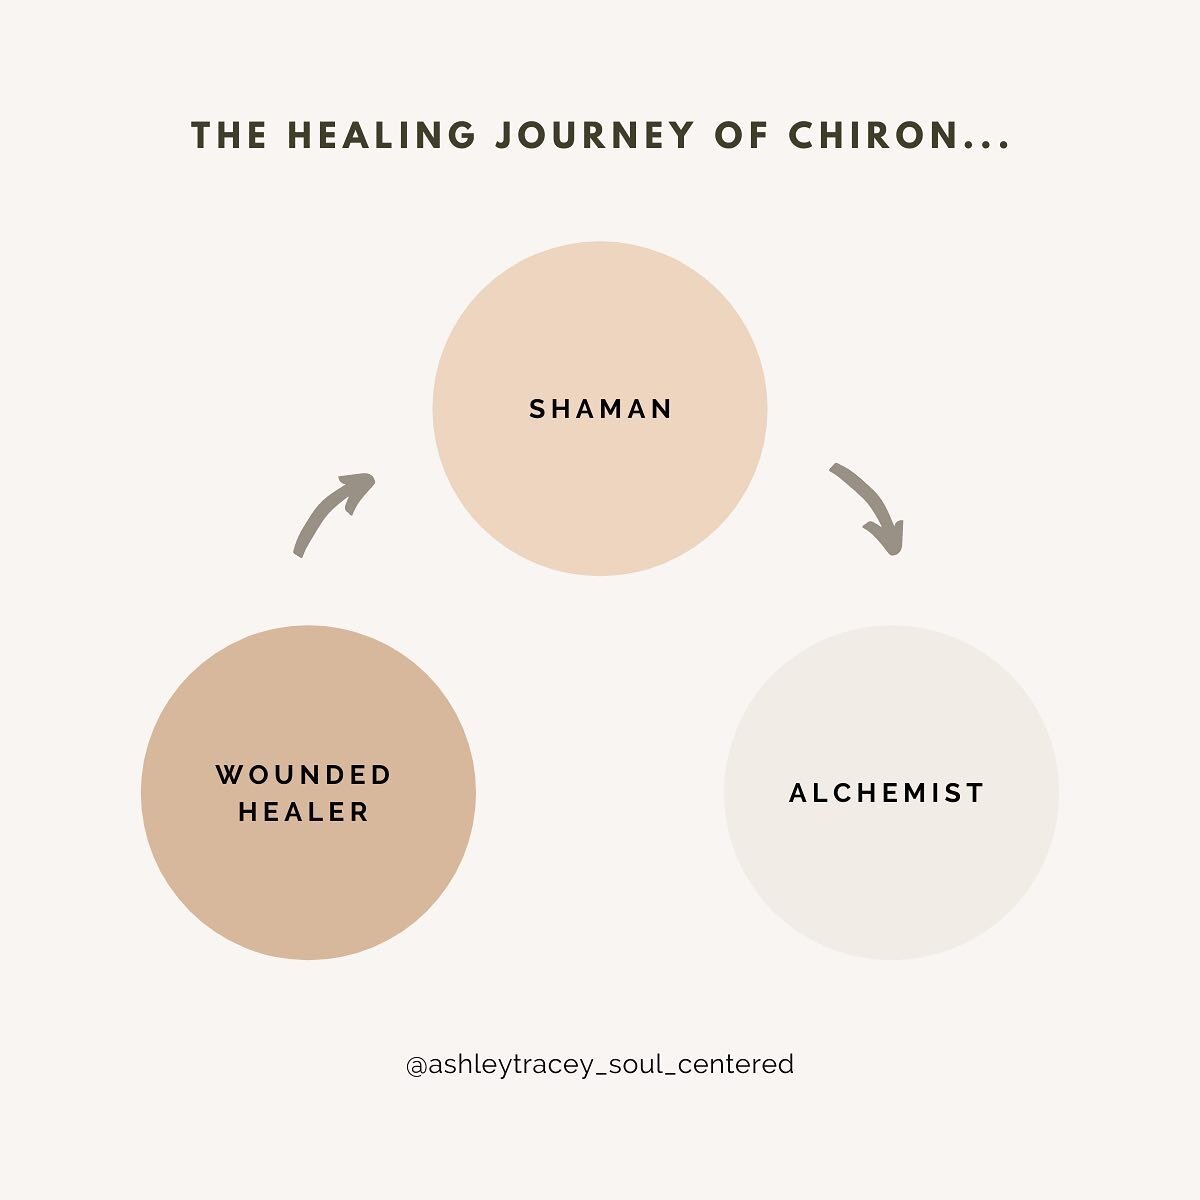 Let&rsquo;s talk about healing&hellip;

One of the key influencers to your personal healing journey in your birth chart is Chiron. 

Chiron is an asteroid that orbits between Saturn and Uranus, acting as the rainbow bridge that connects your physical